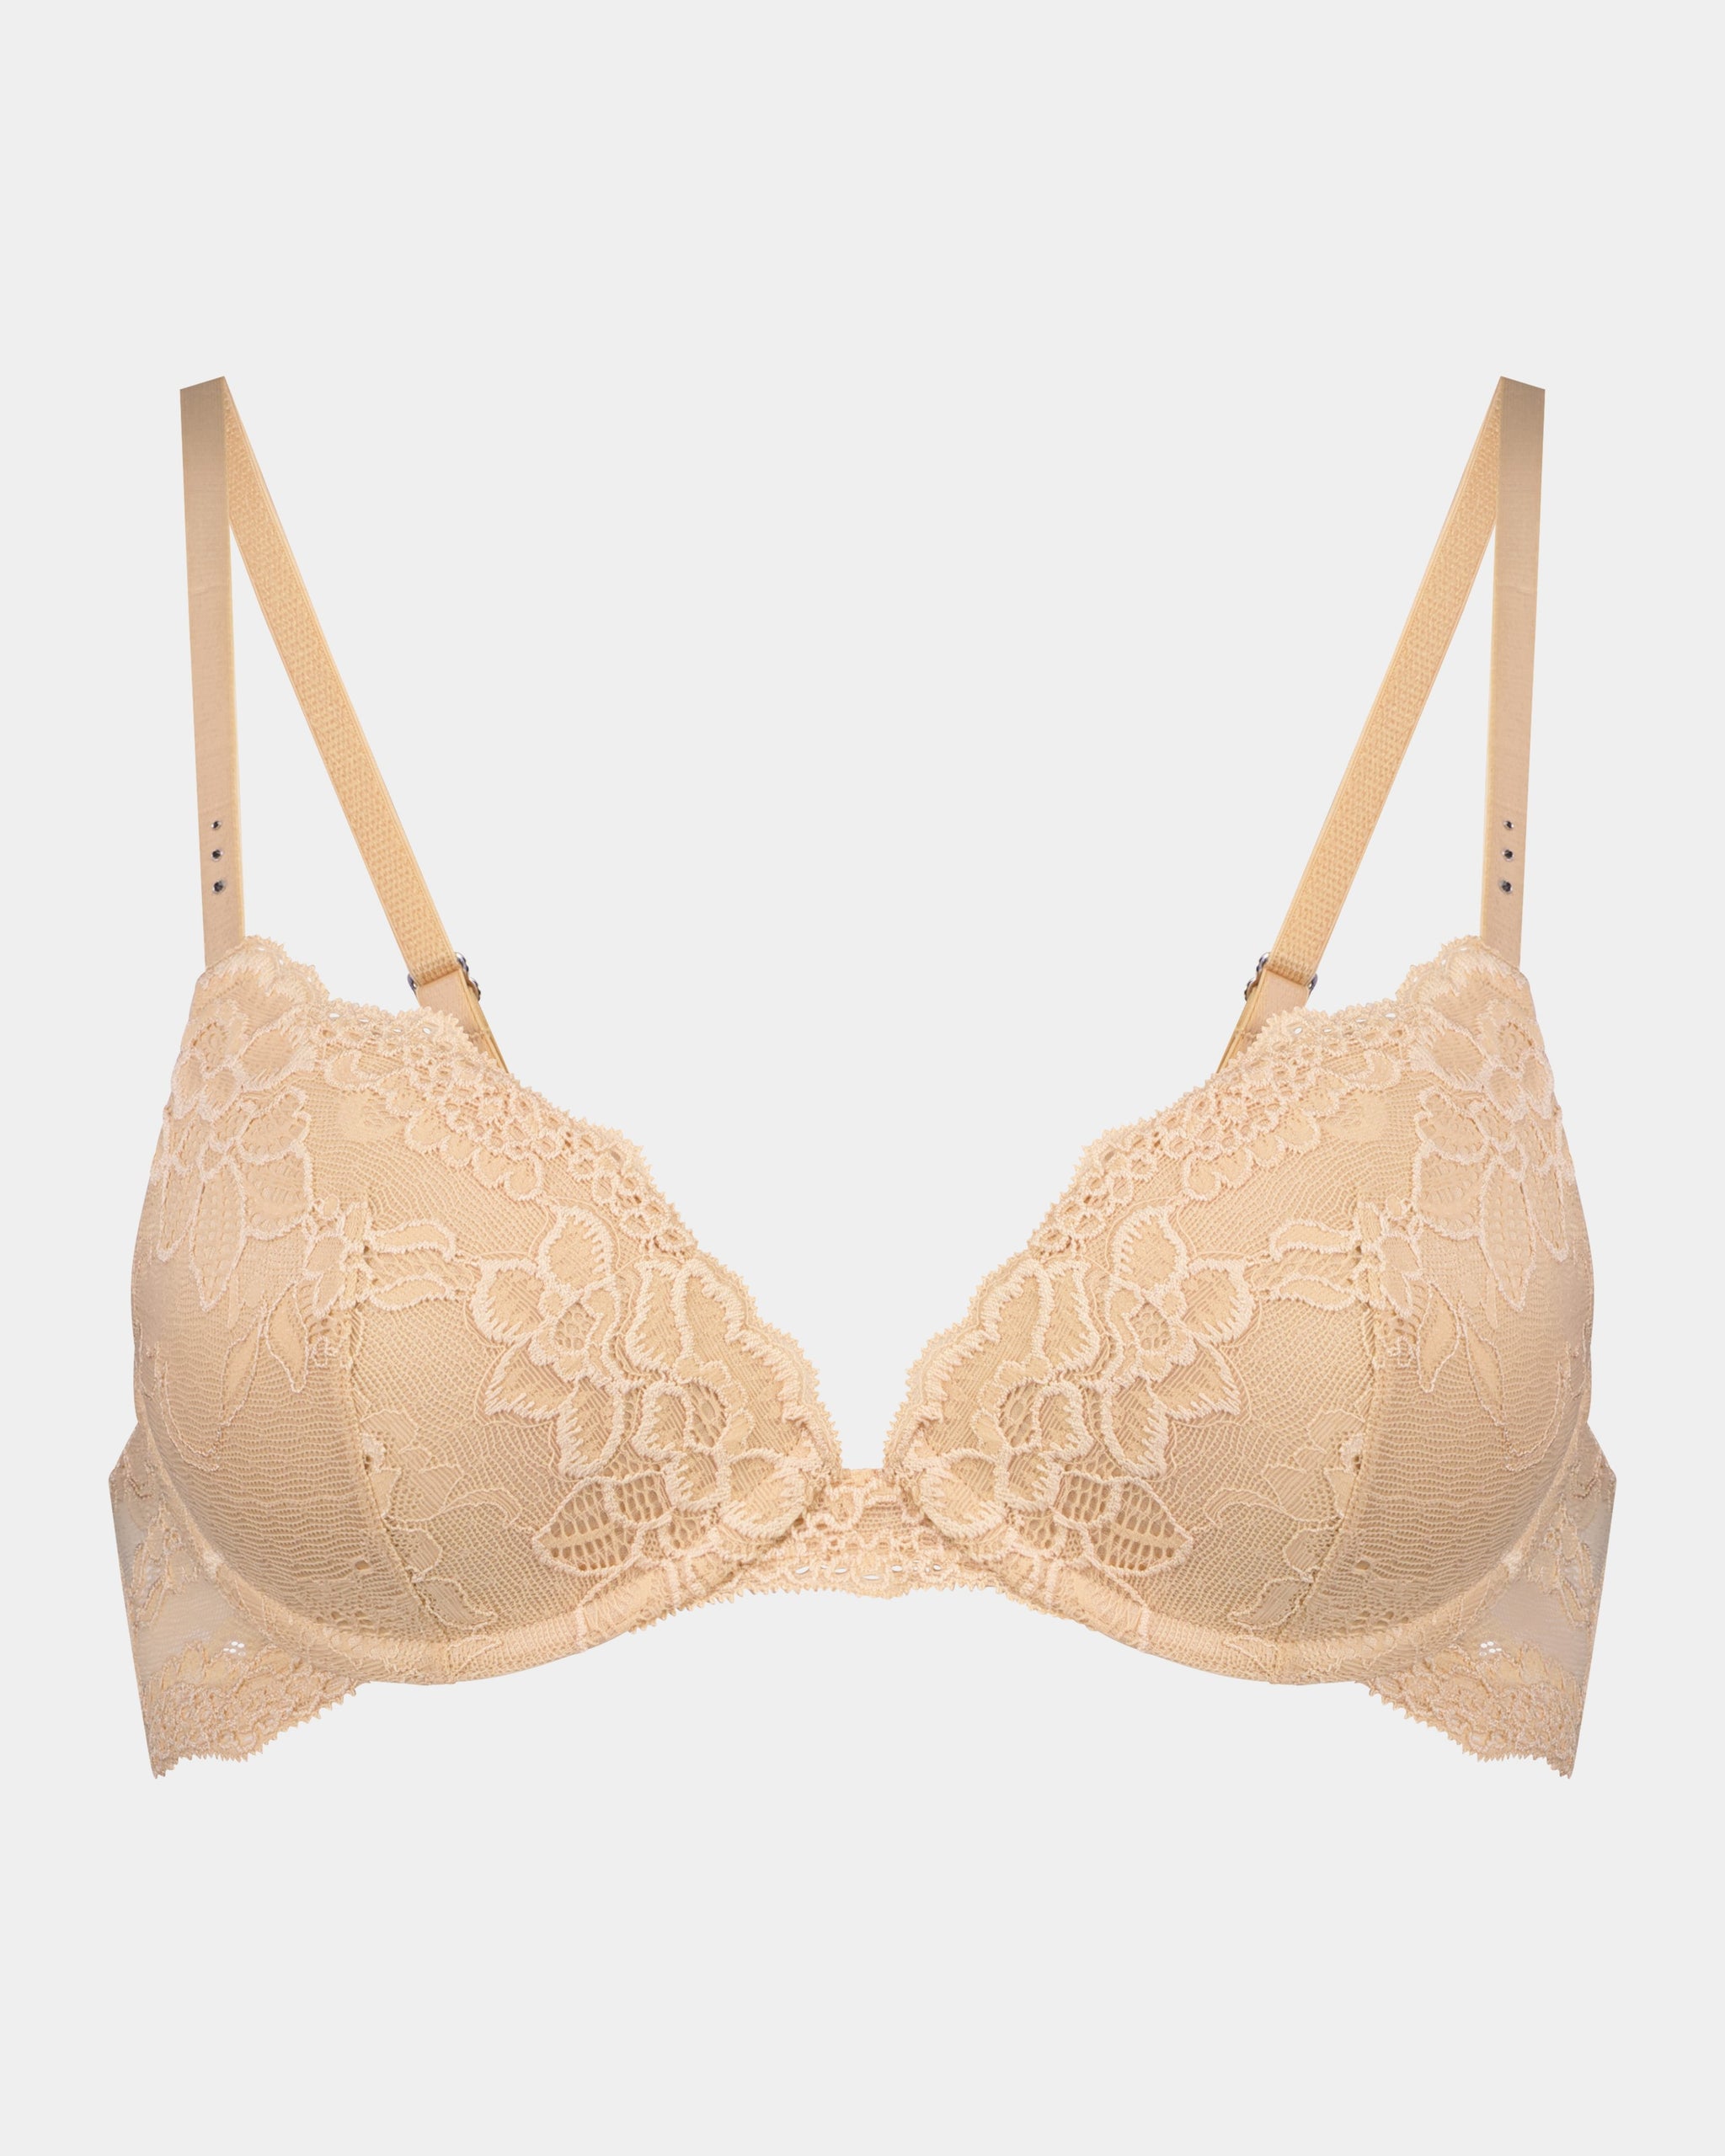 Cacique 40H Bra Beige Nude Color Smooth Boost Plunge Lined Padded